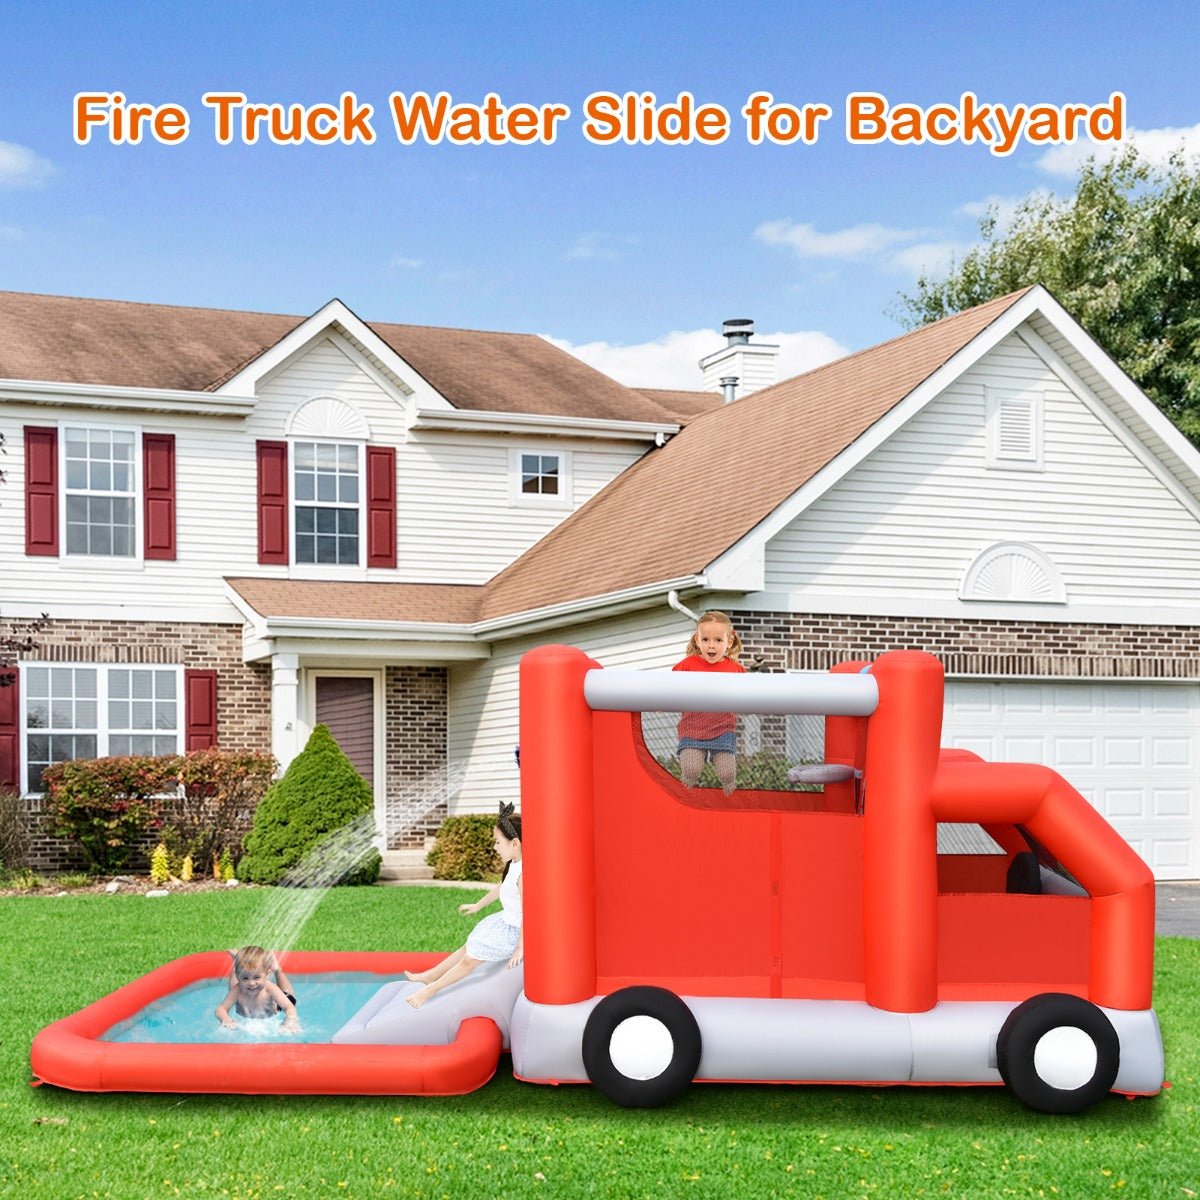 Firefighter Themed Water Slide for Kids - Splash and Play with Blower